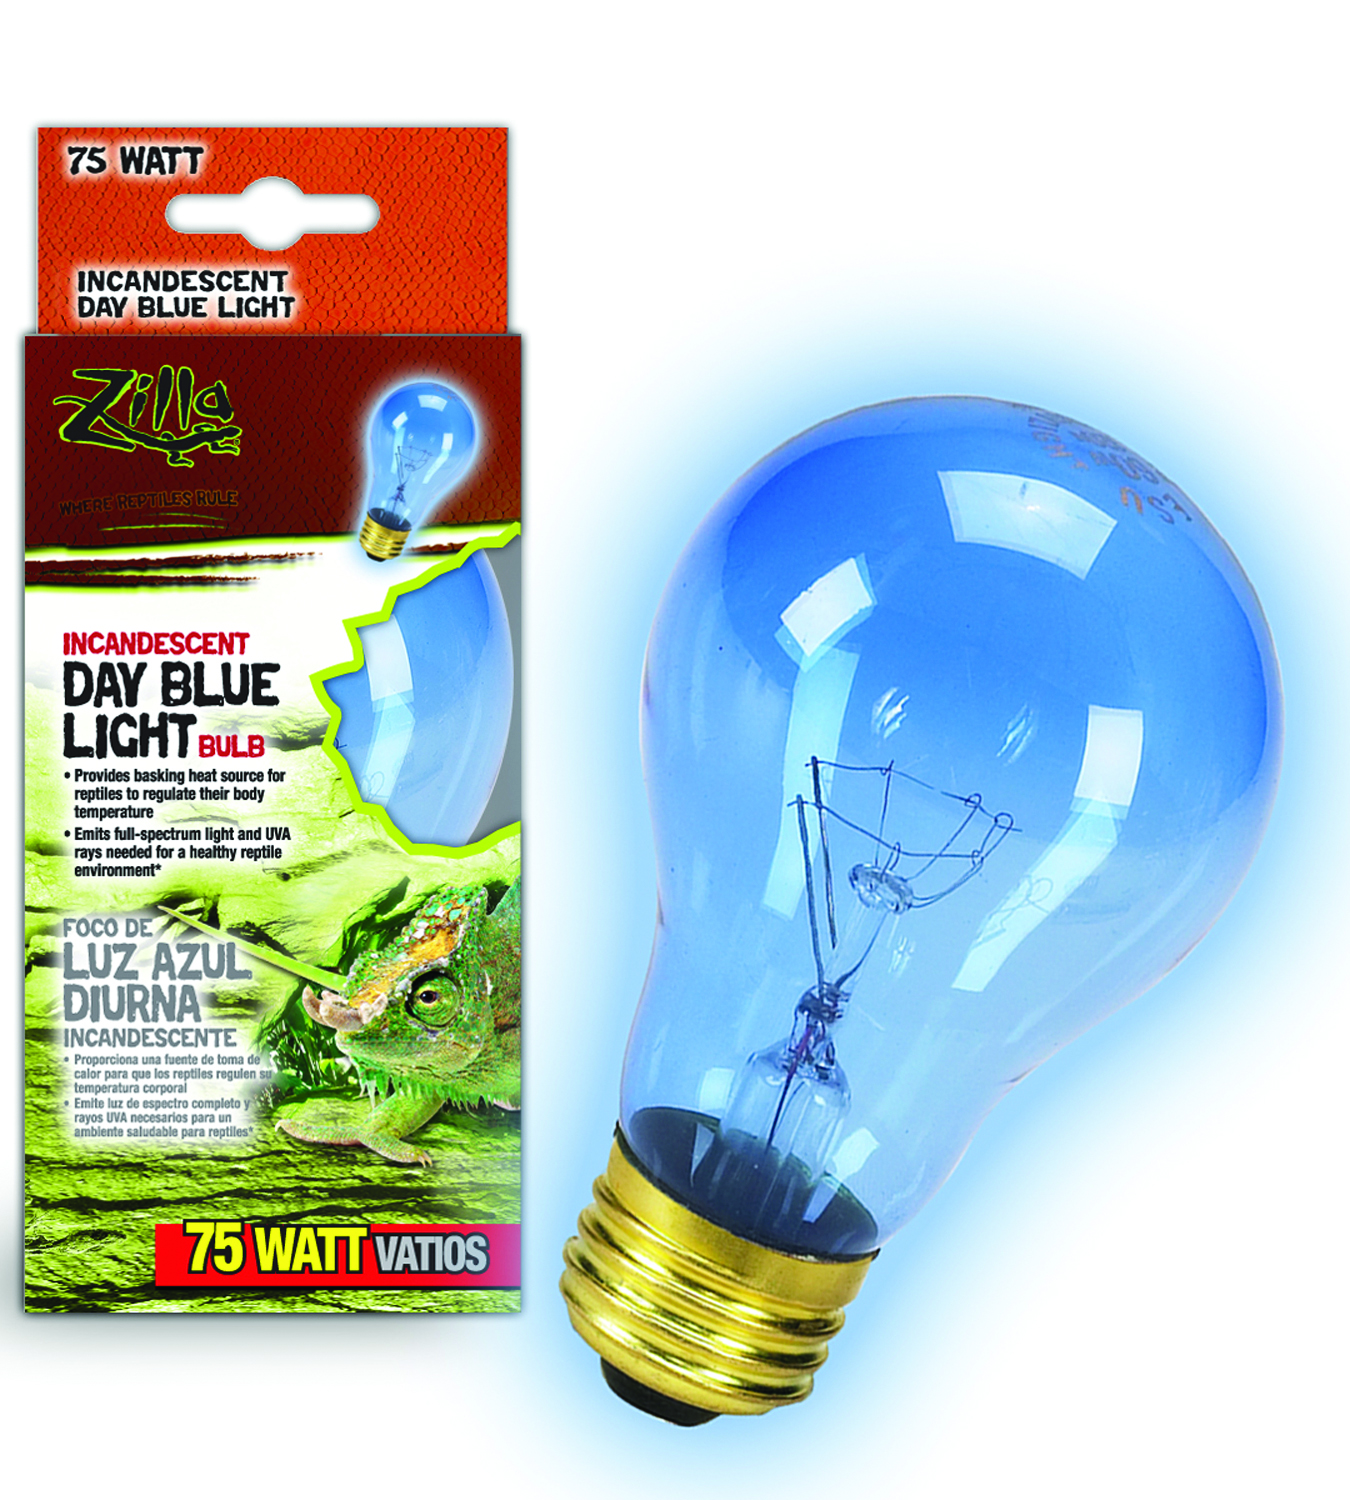 DAY BLUE INCANDESCENT BULB